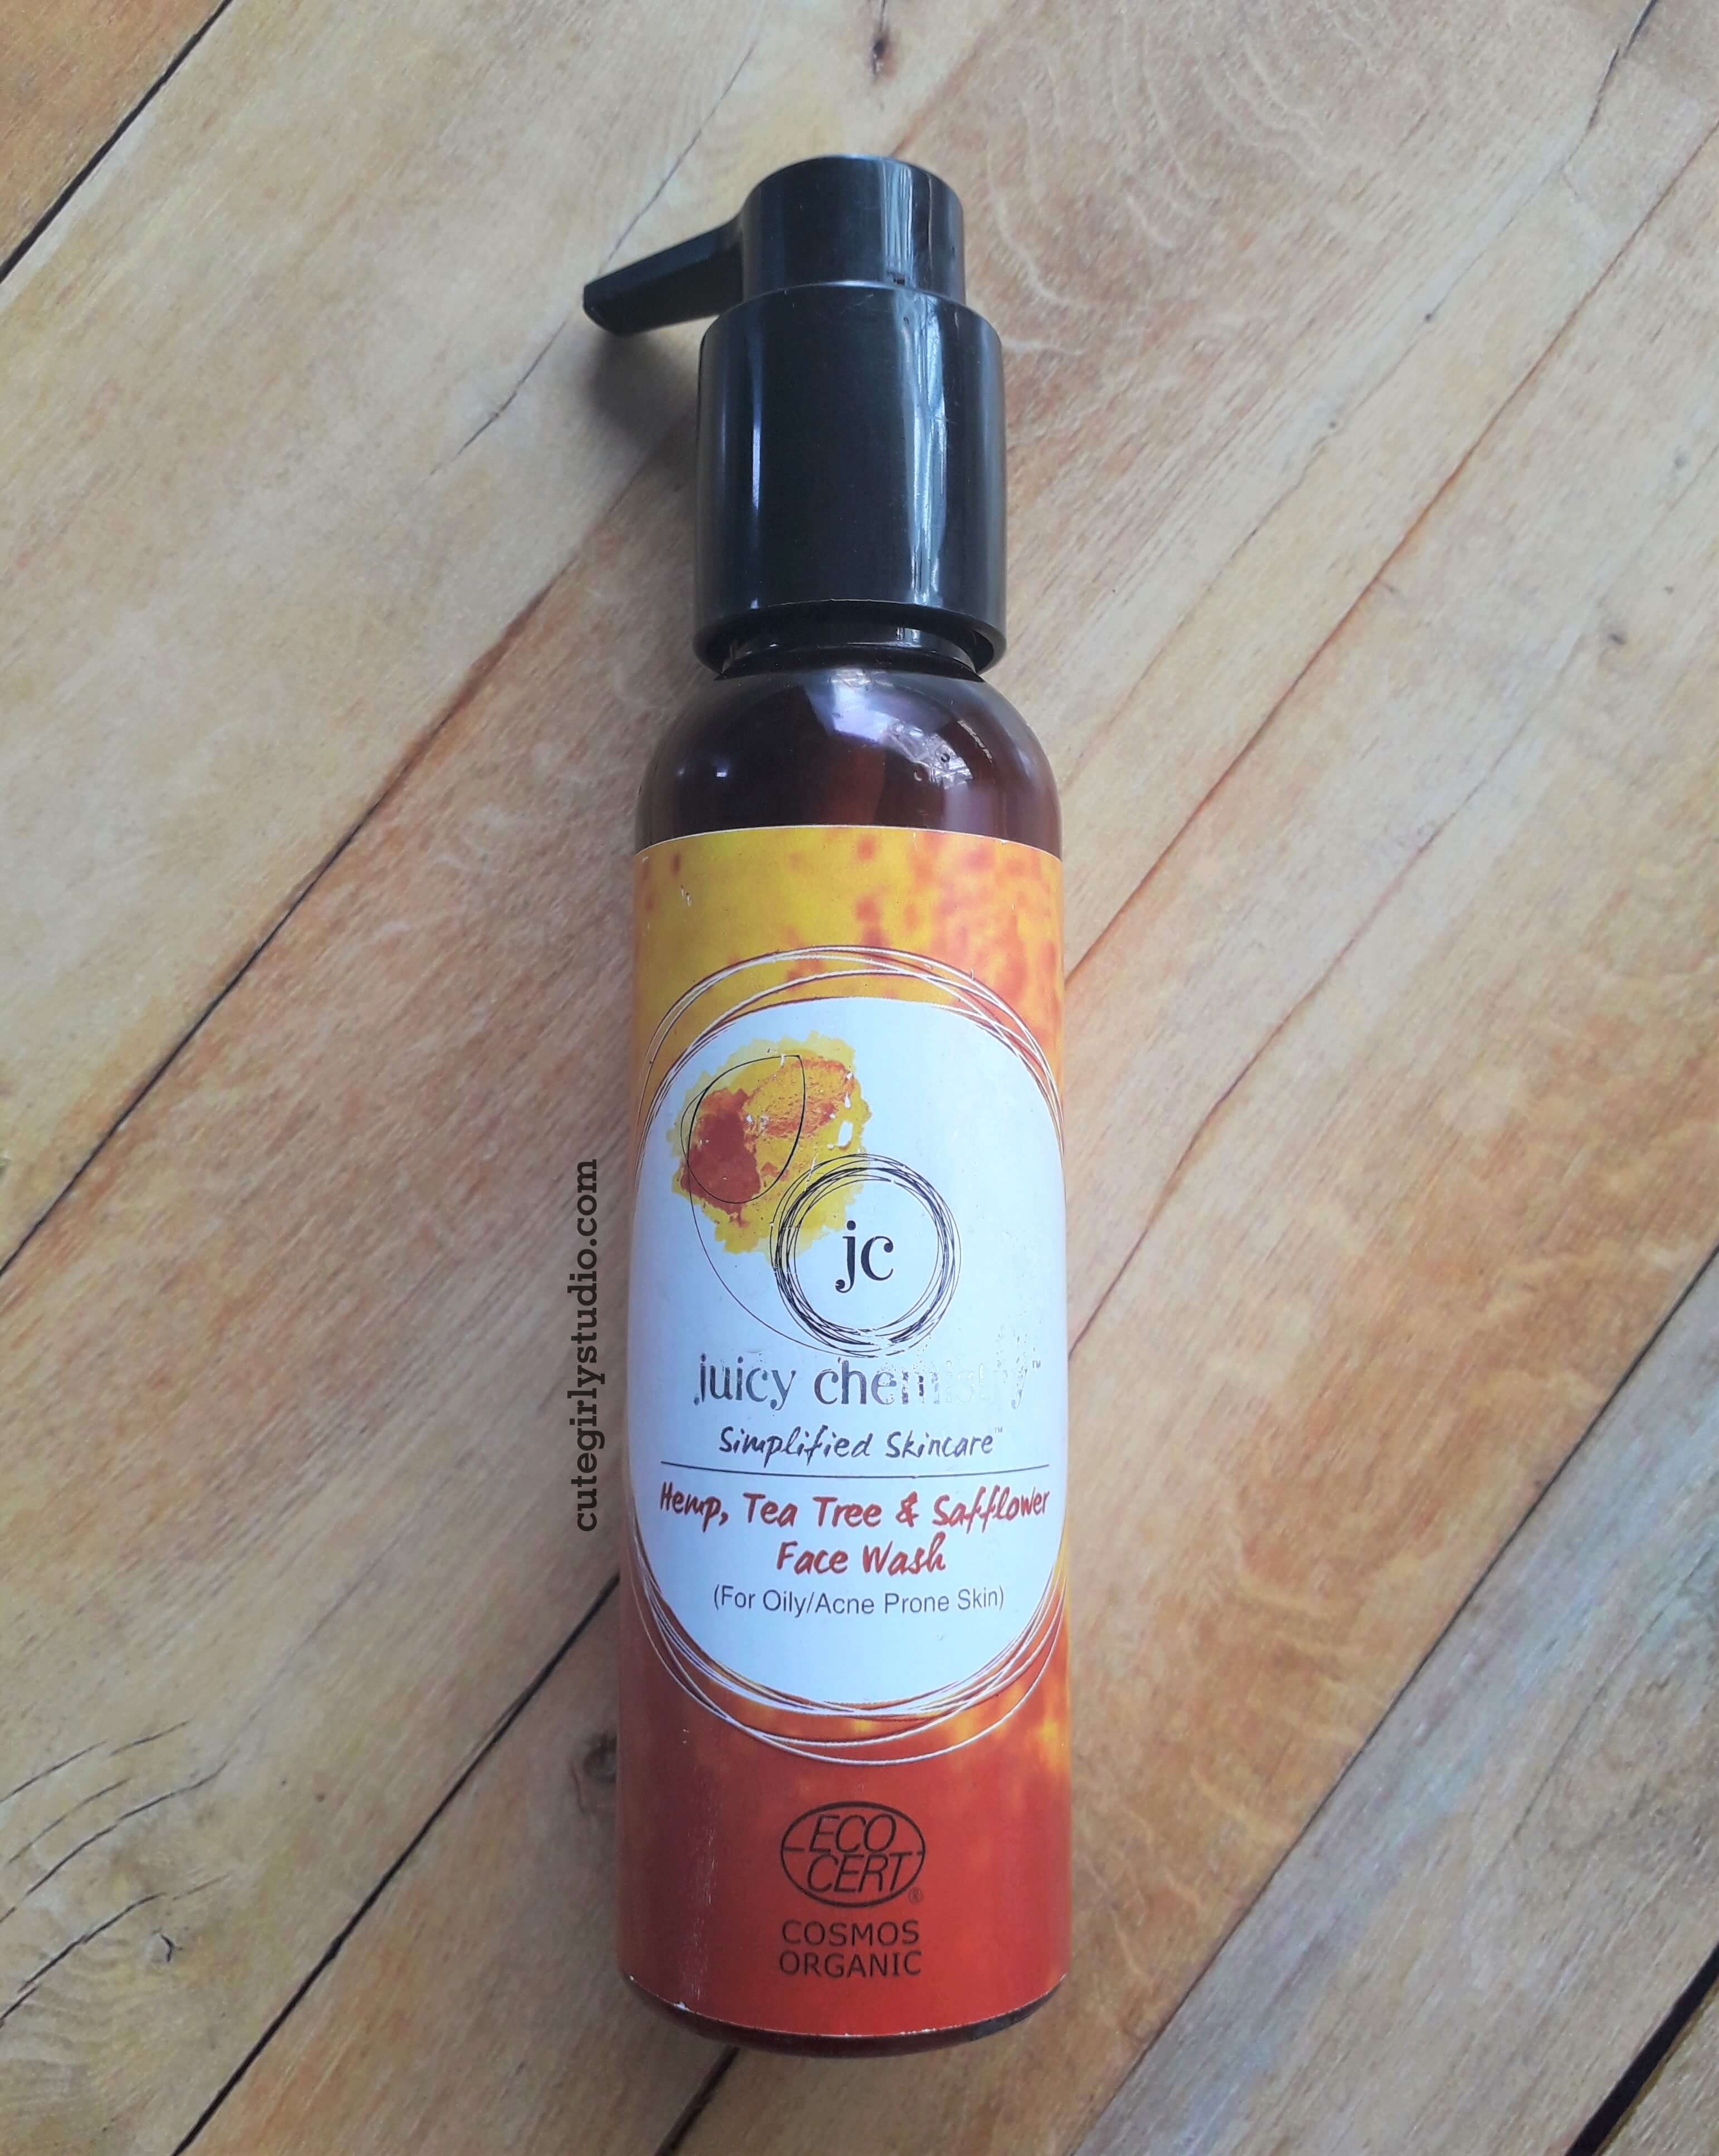 Juicy chemistry hemp, tea tree and safflower face wash ingredients review